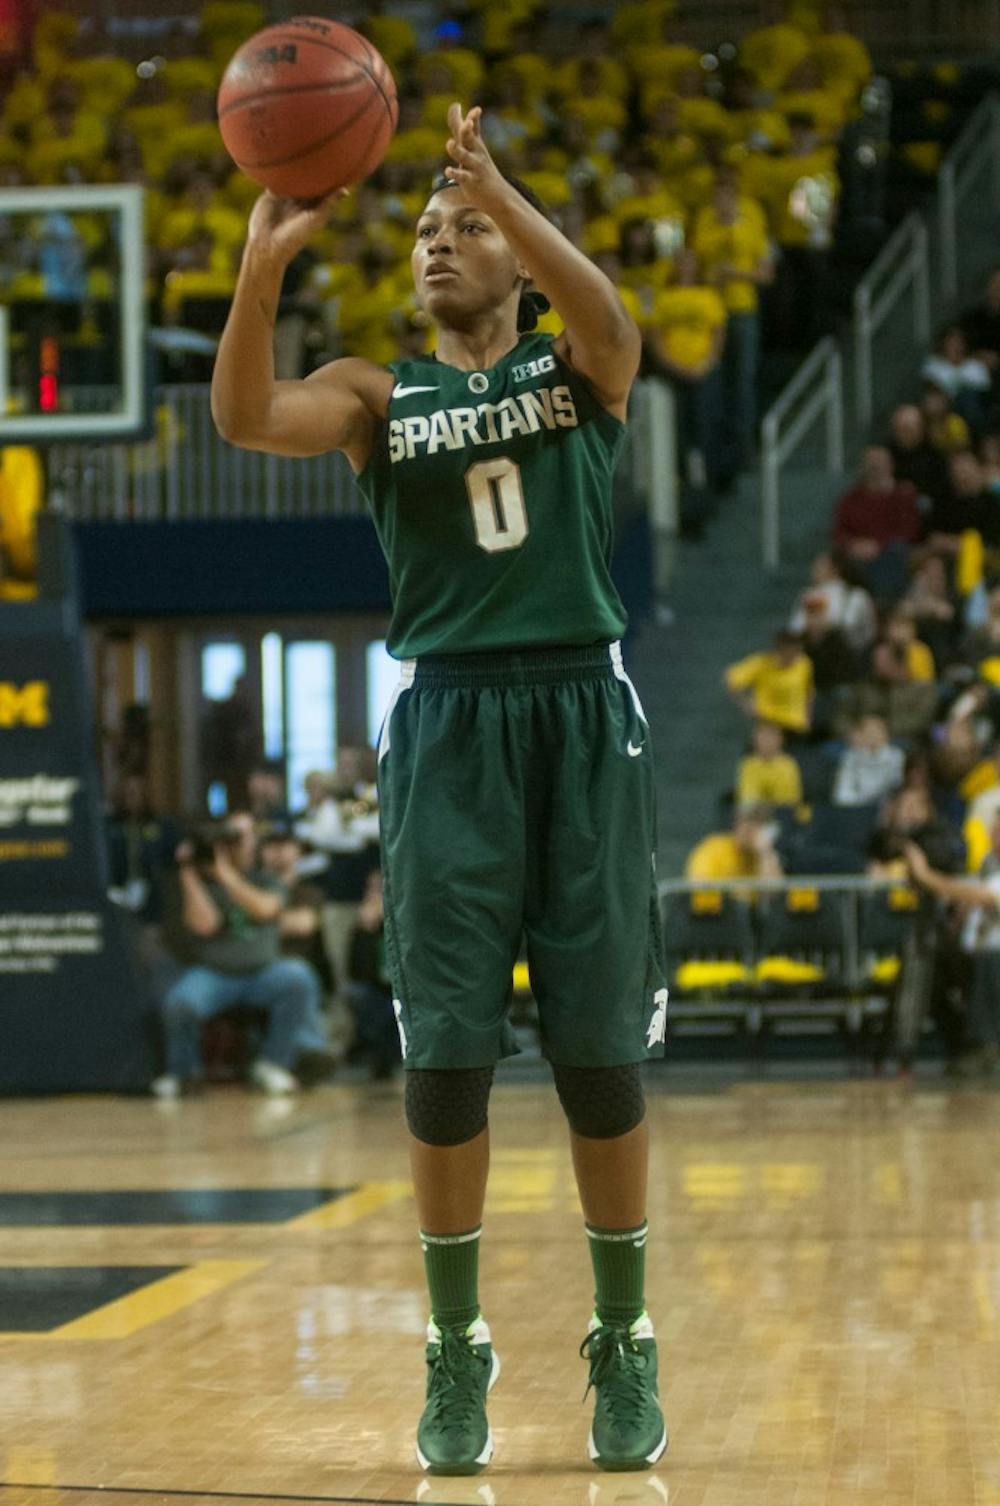 	<p>Junior guard Kiana Johnson shoots a three-pointer during the game against Michigan on Jan. 12, 2014, at Crisler Center in Ann Arbor, Mich. The Spartans defeated the Wolverines, 79-72. Danyelle Morrow/The State News</p>